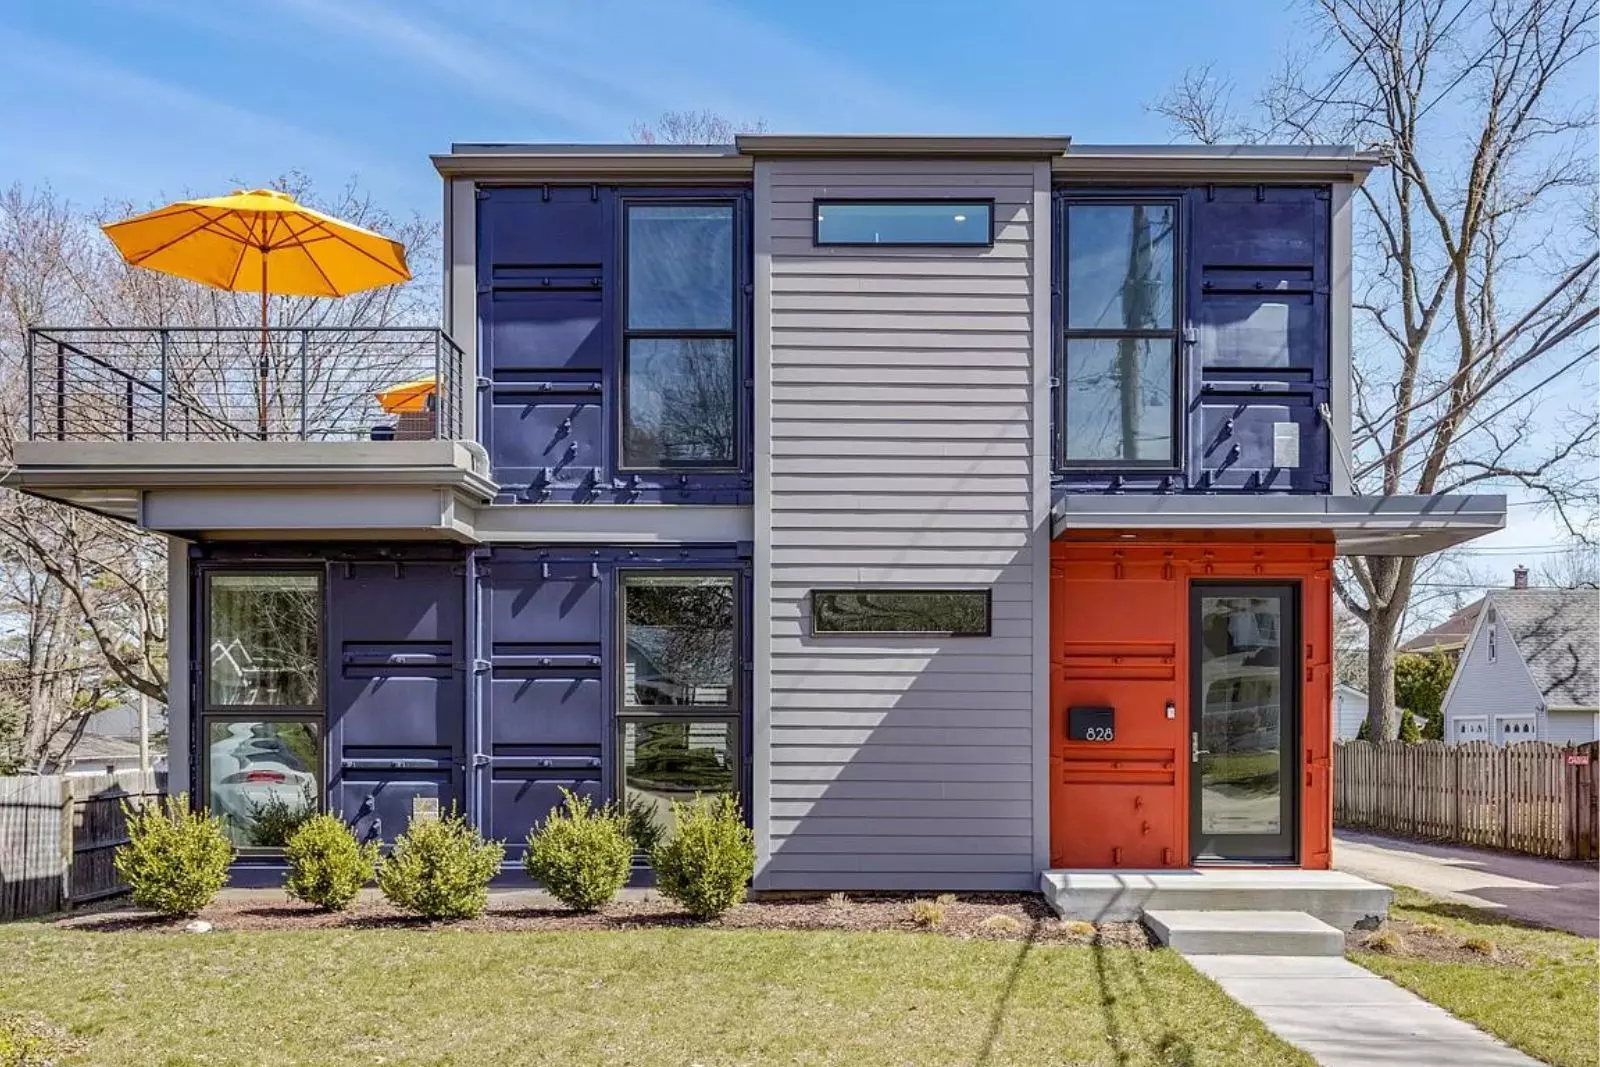 Illinois Home Was Made Out of 7 Shipping Containers